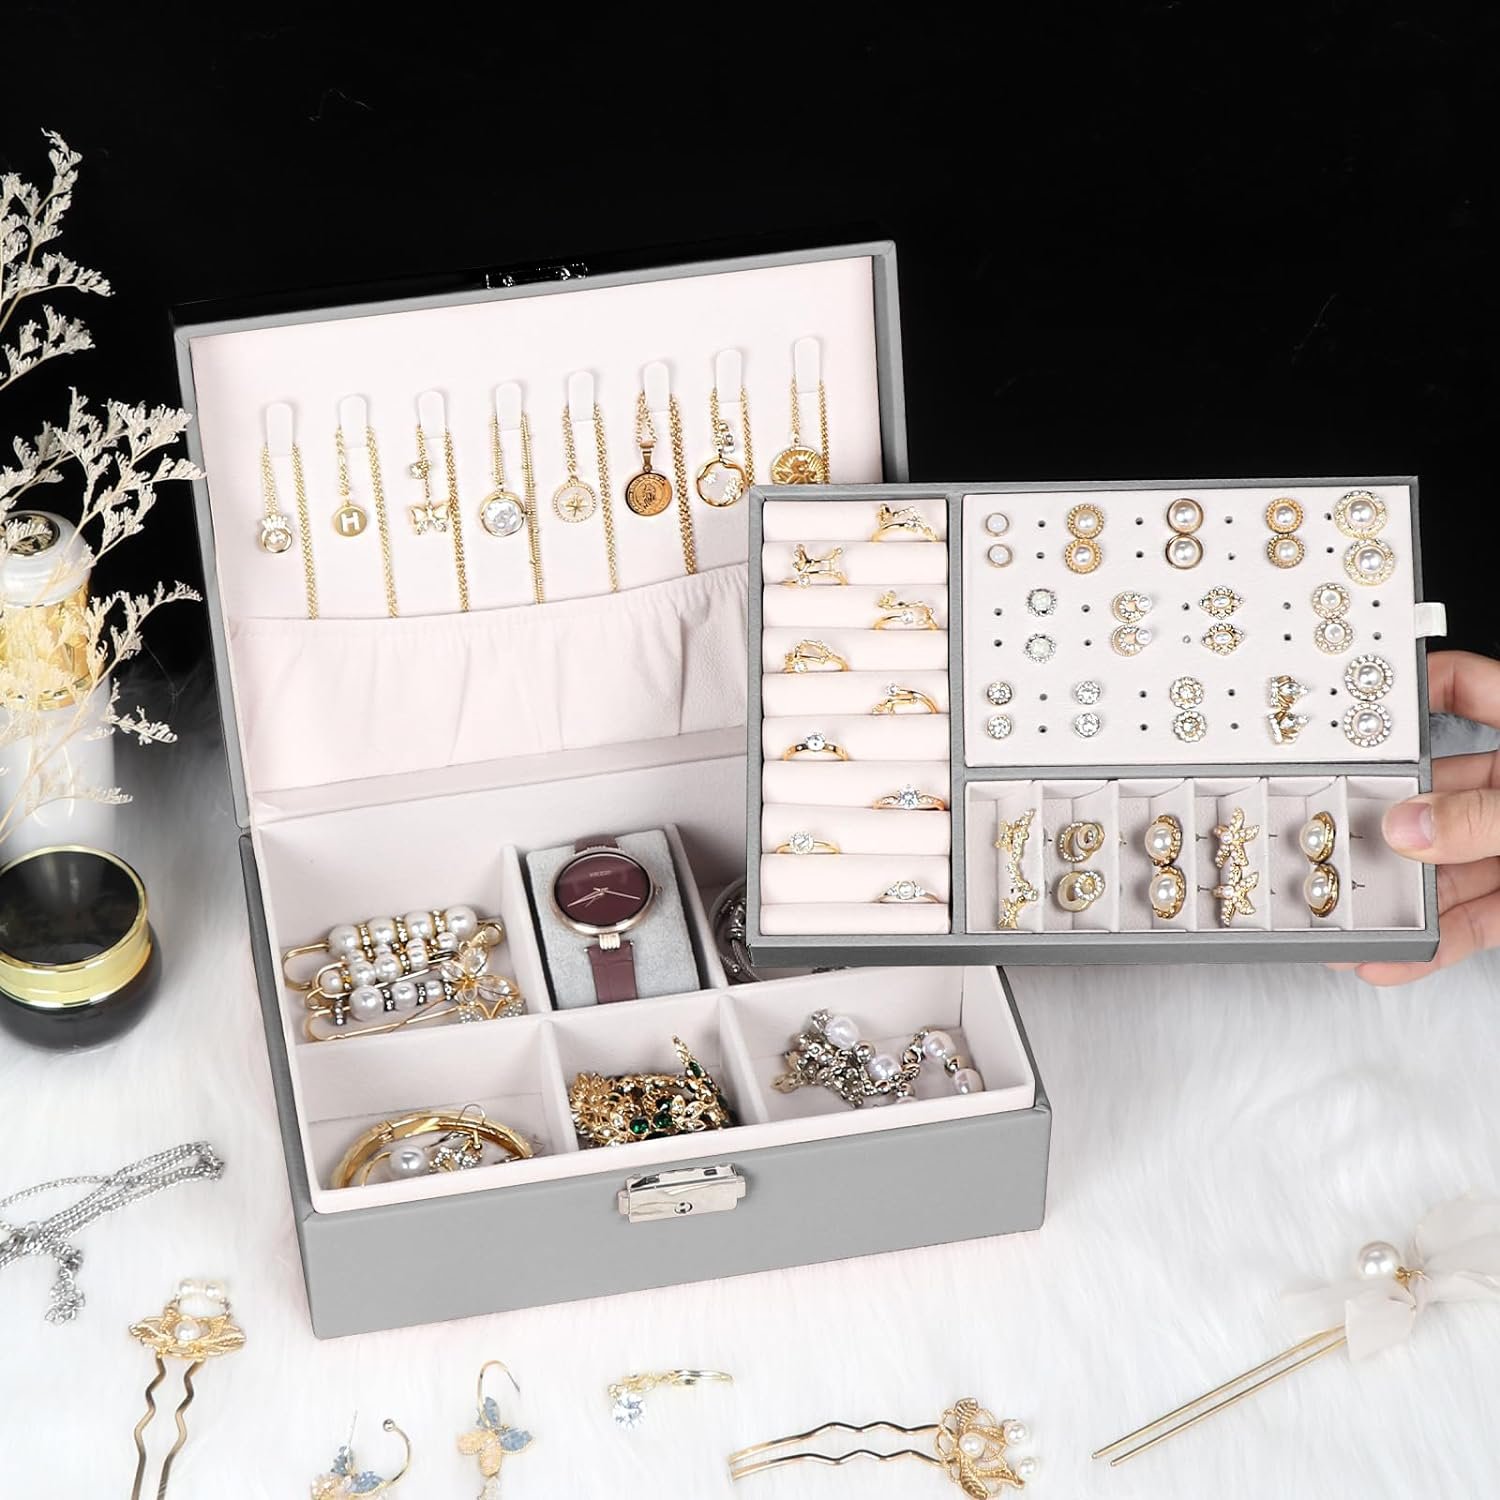 2 Layers Jewelry Organizer Container Review